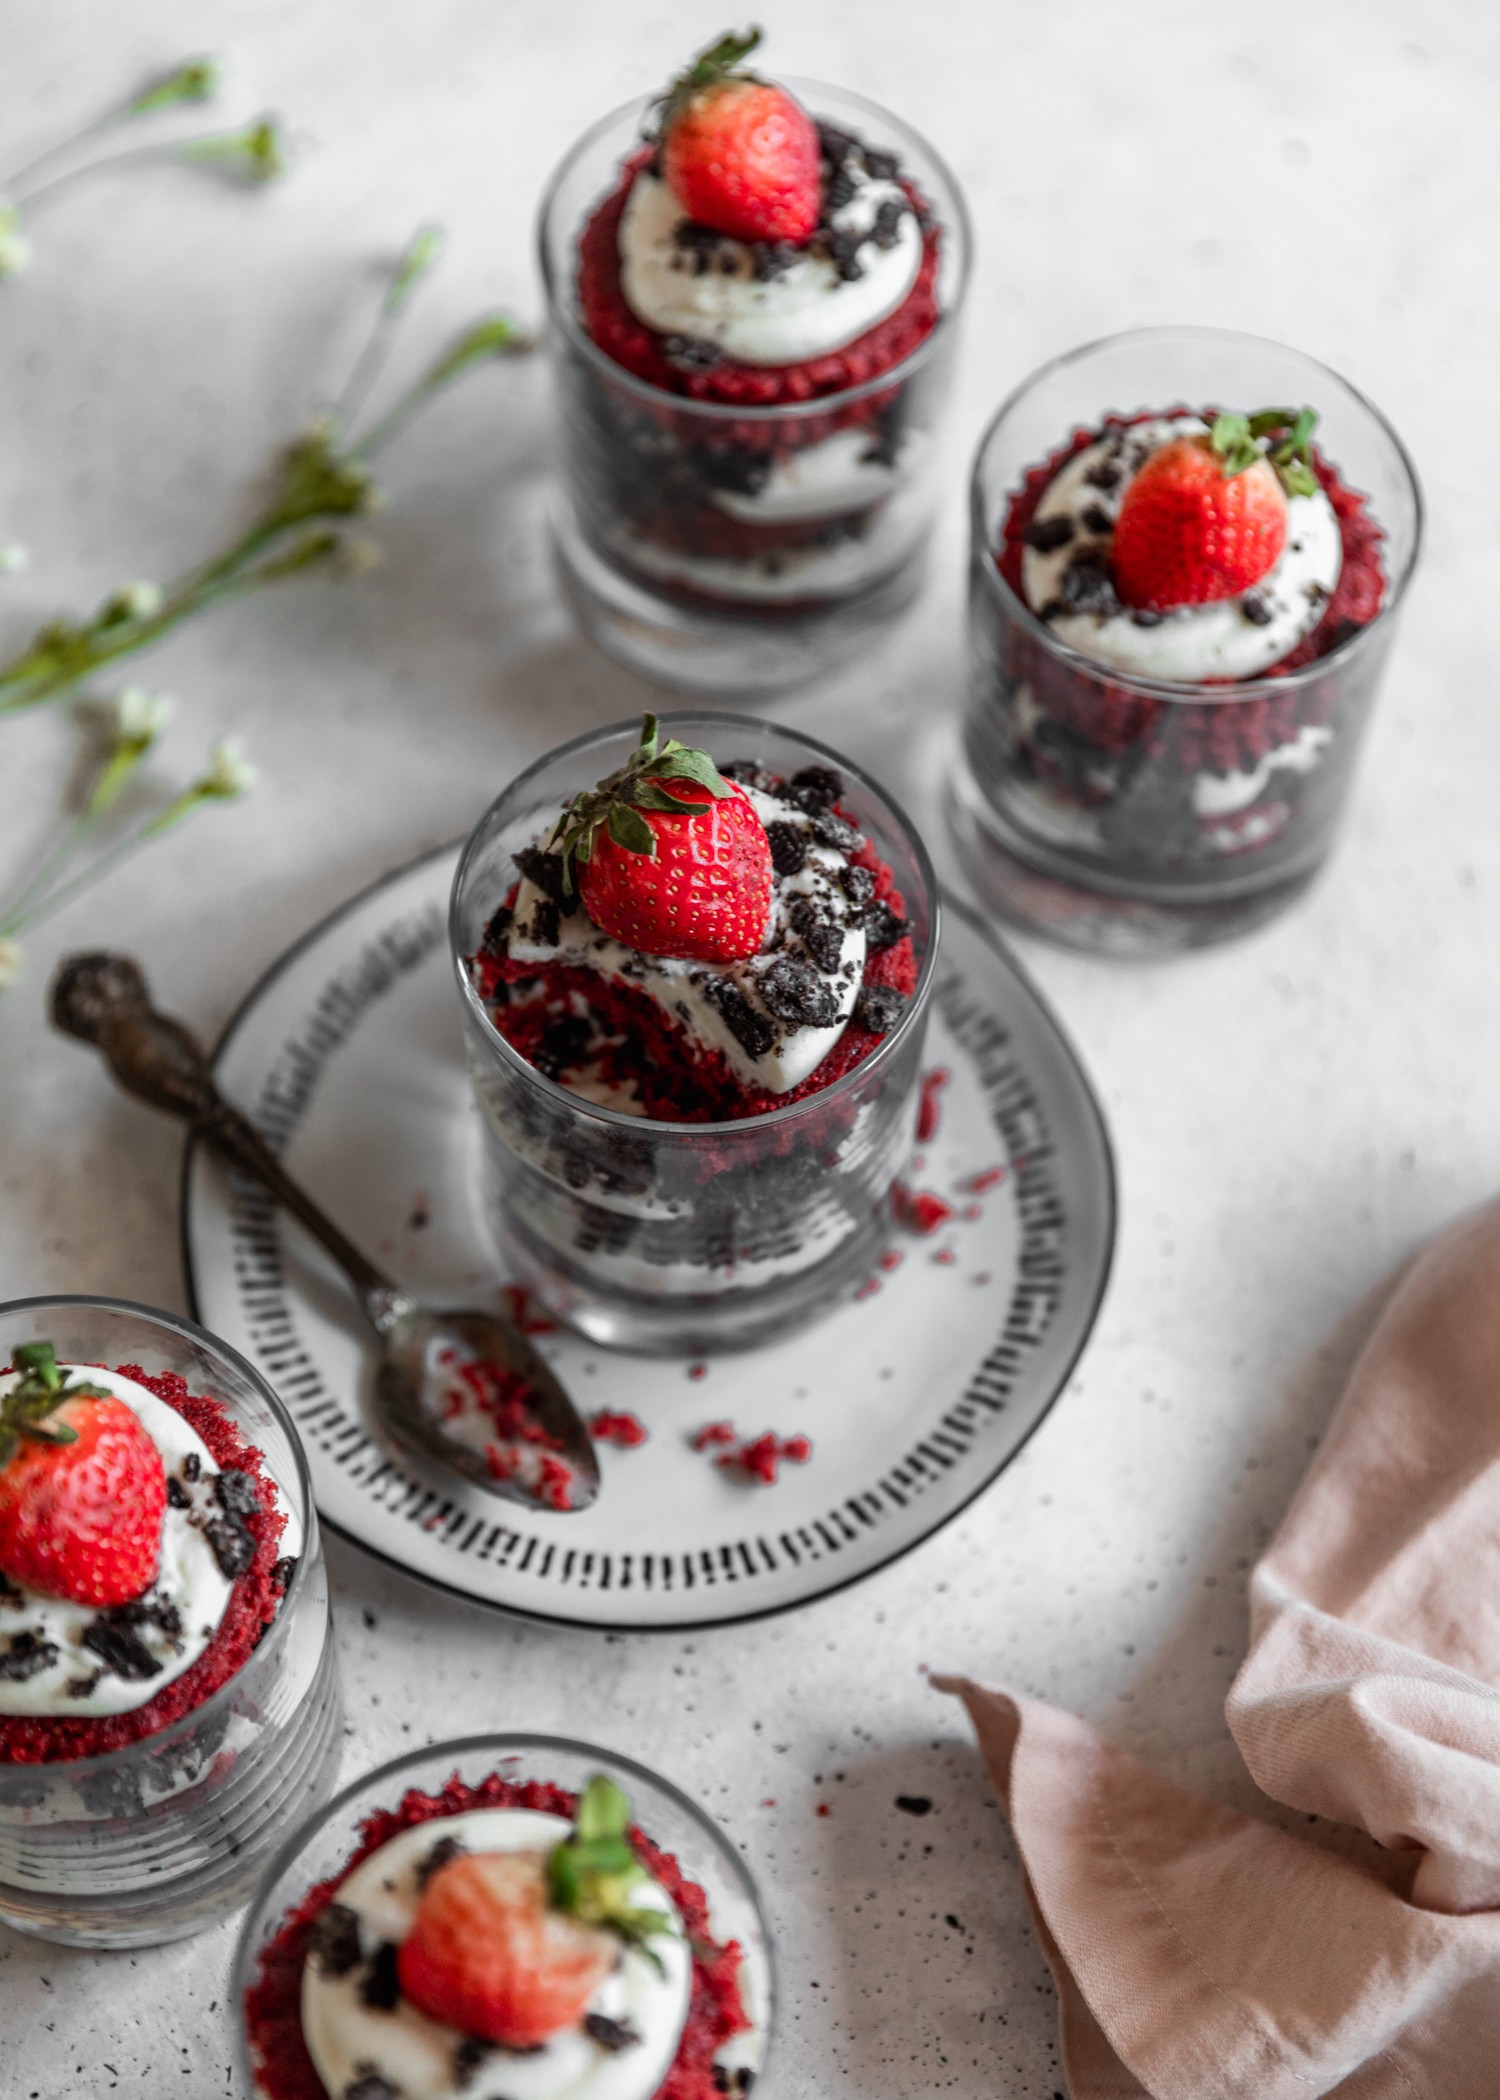 Five cheesecake red velvet trifles on a grey table in a curved shape. The middle trifle is on a black and white plate with a spoon, and there is a pink linen in the right lower corner.